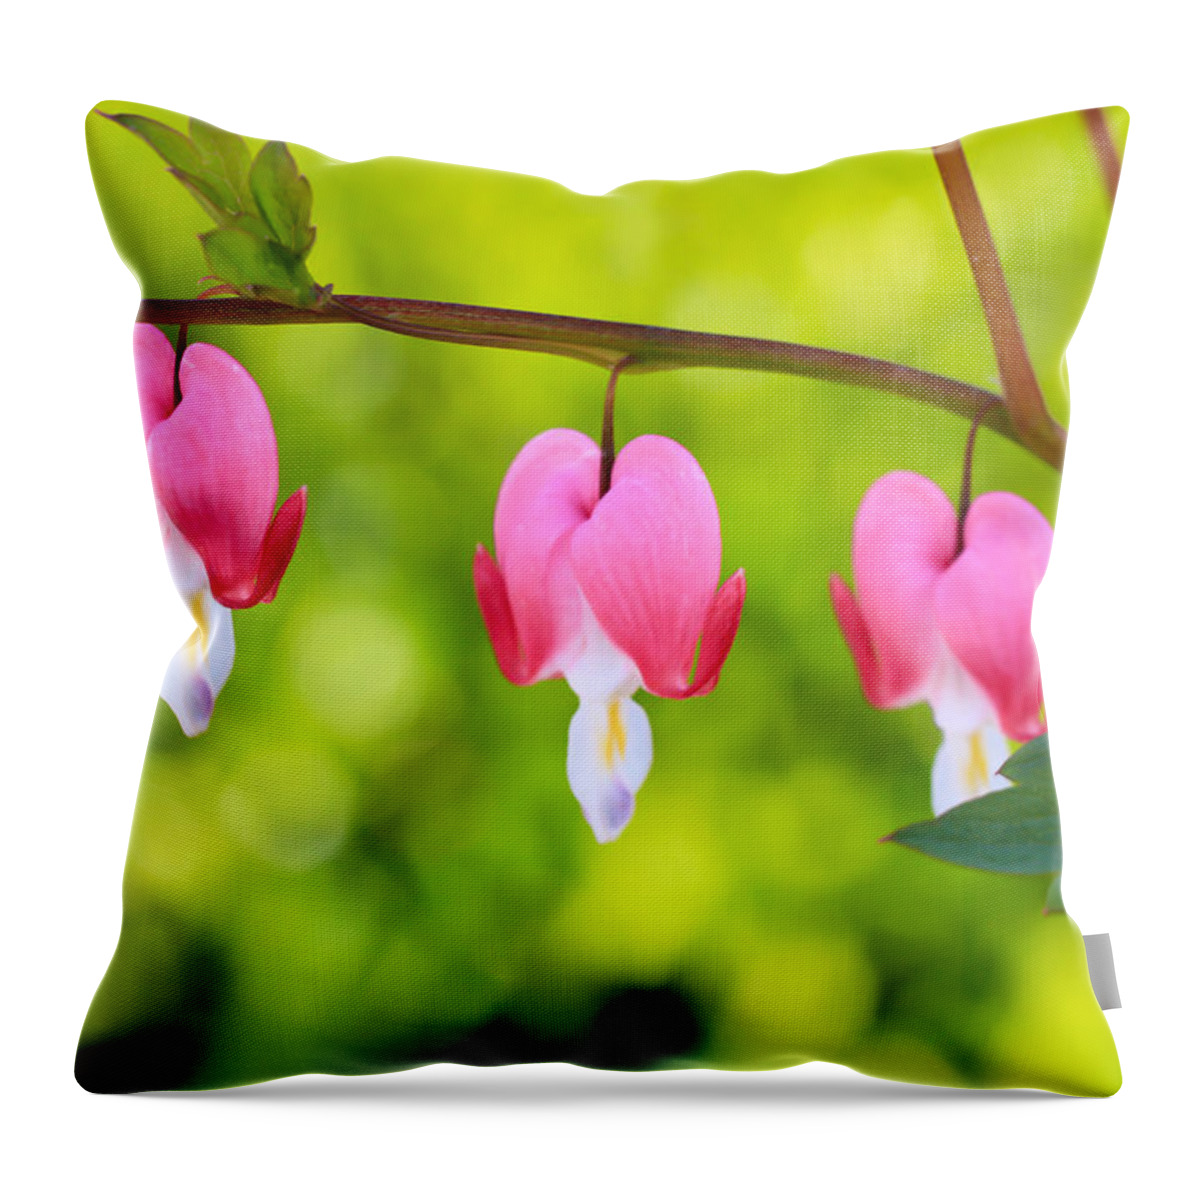 Flowers Throw Pillow featuring the photograph Love by Heidi Smith